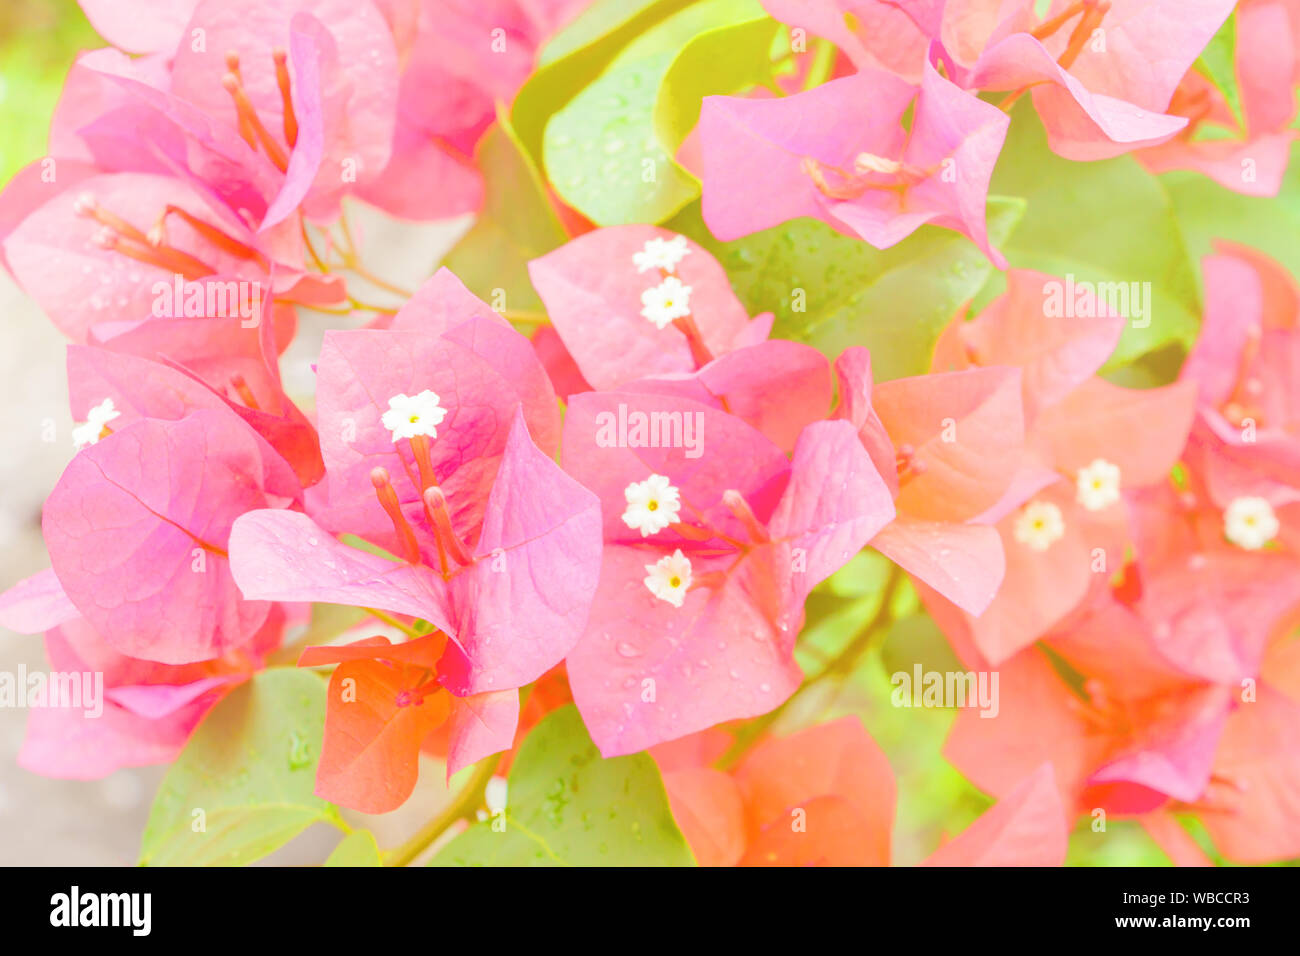 bougainvillea flower red with green leaves beautiful in the garden. with copy space add text Stock Photo